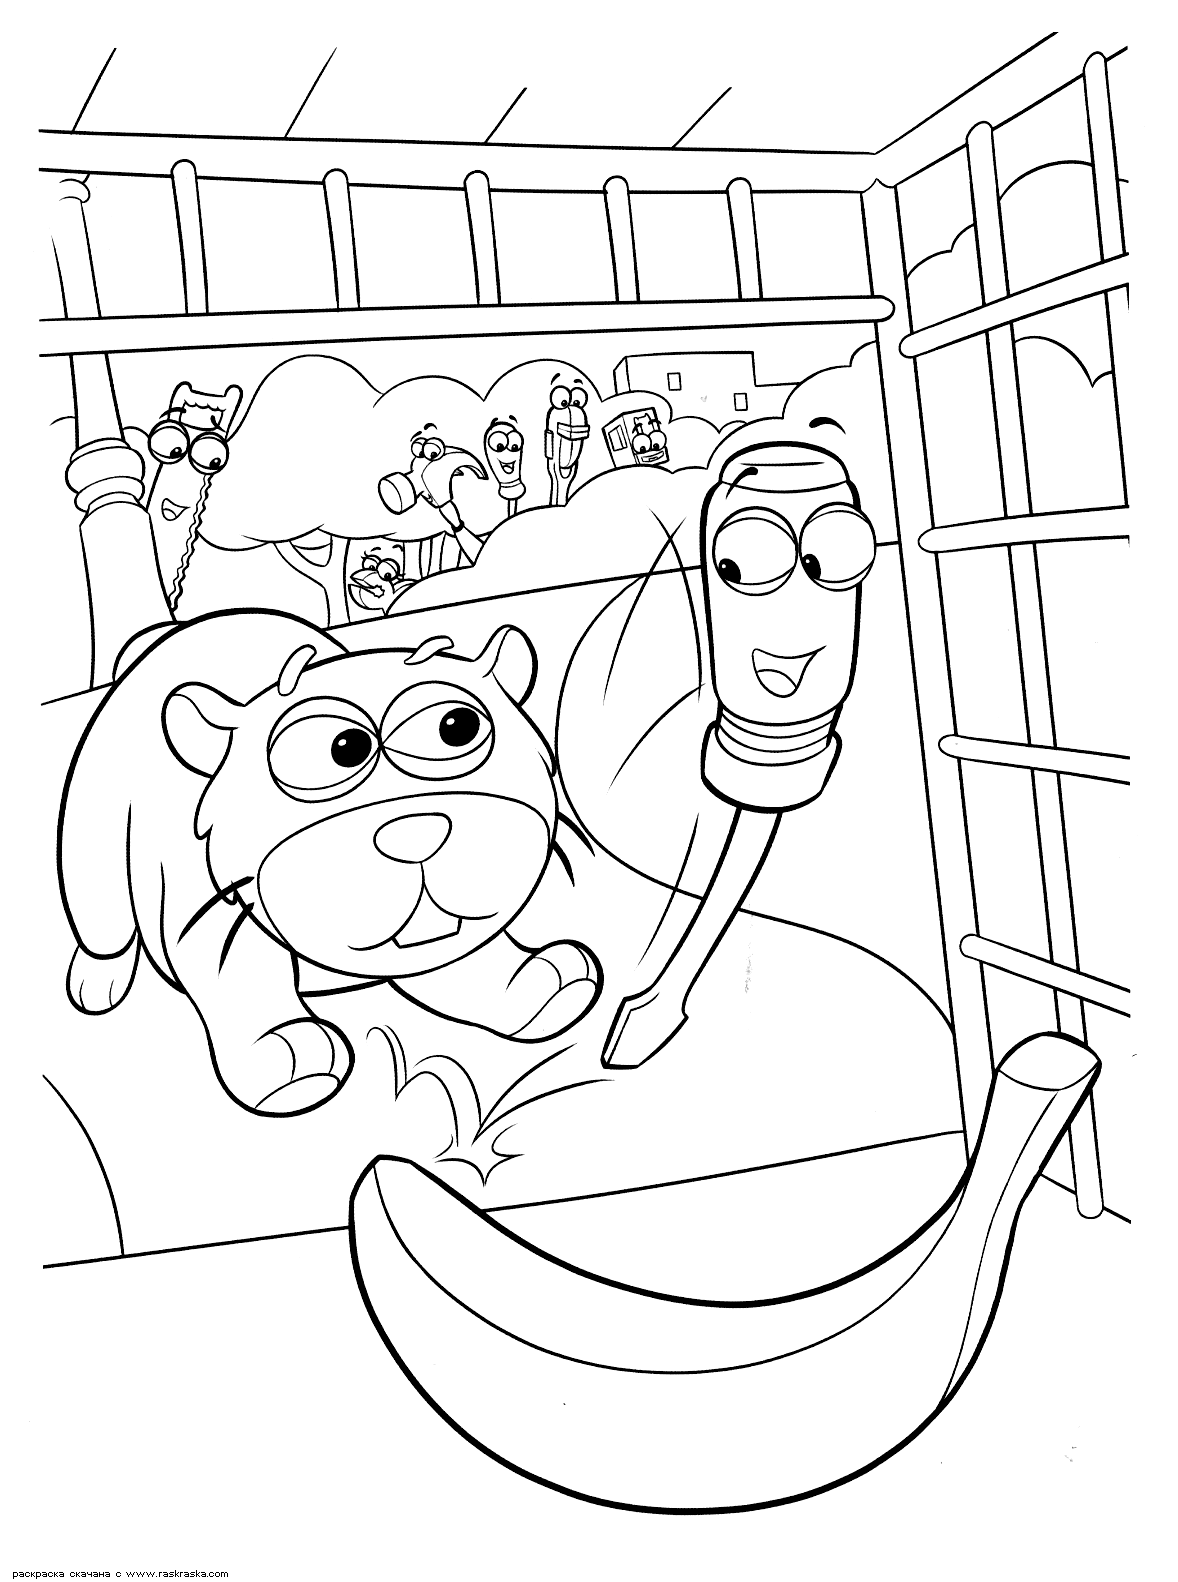 Image of Many and its tools to download and color - Handy Manny Kids Coloring  Pages